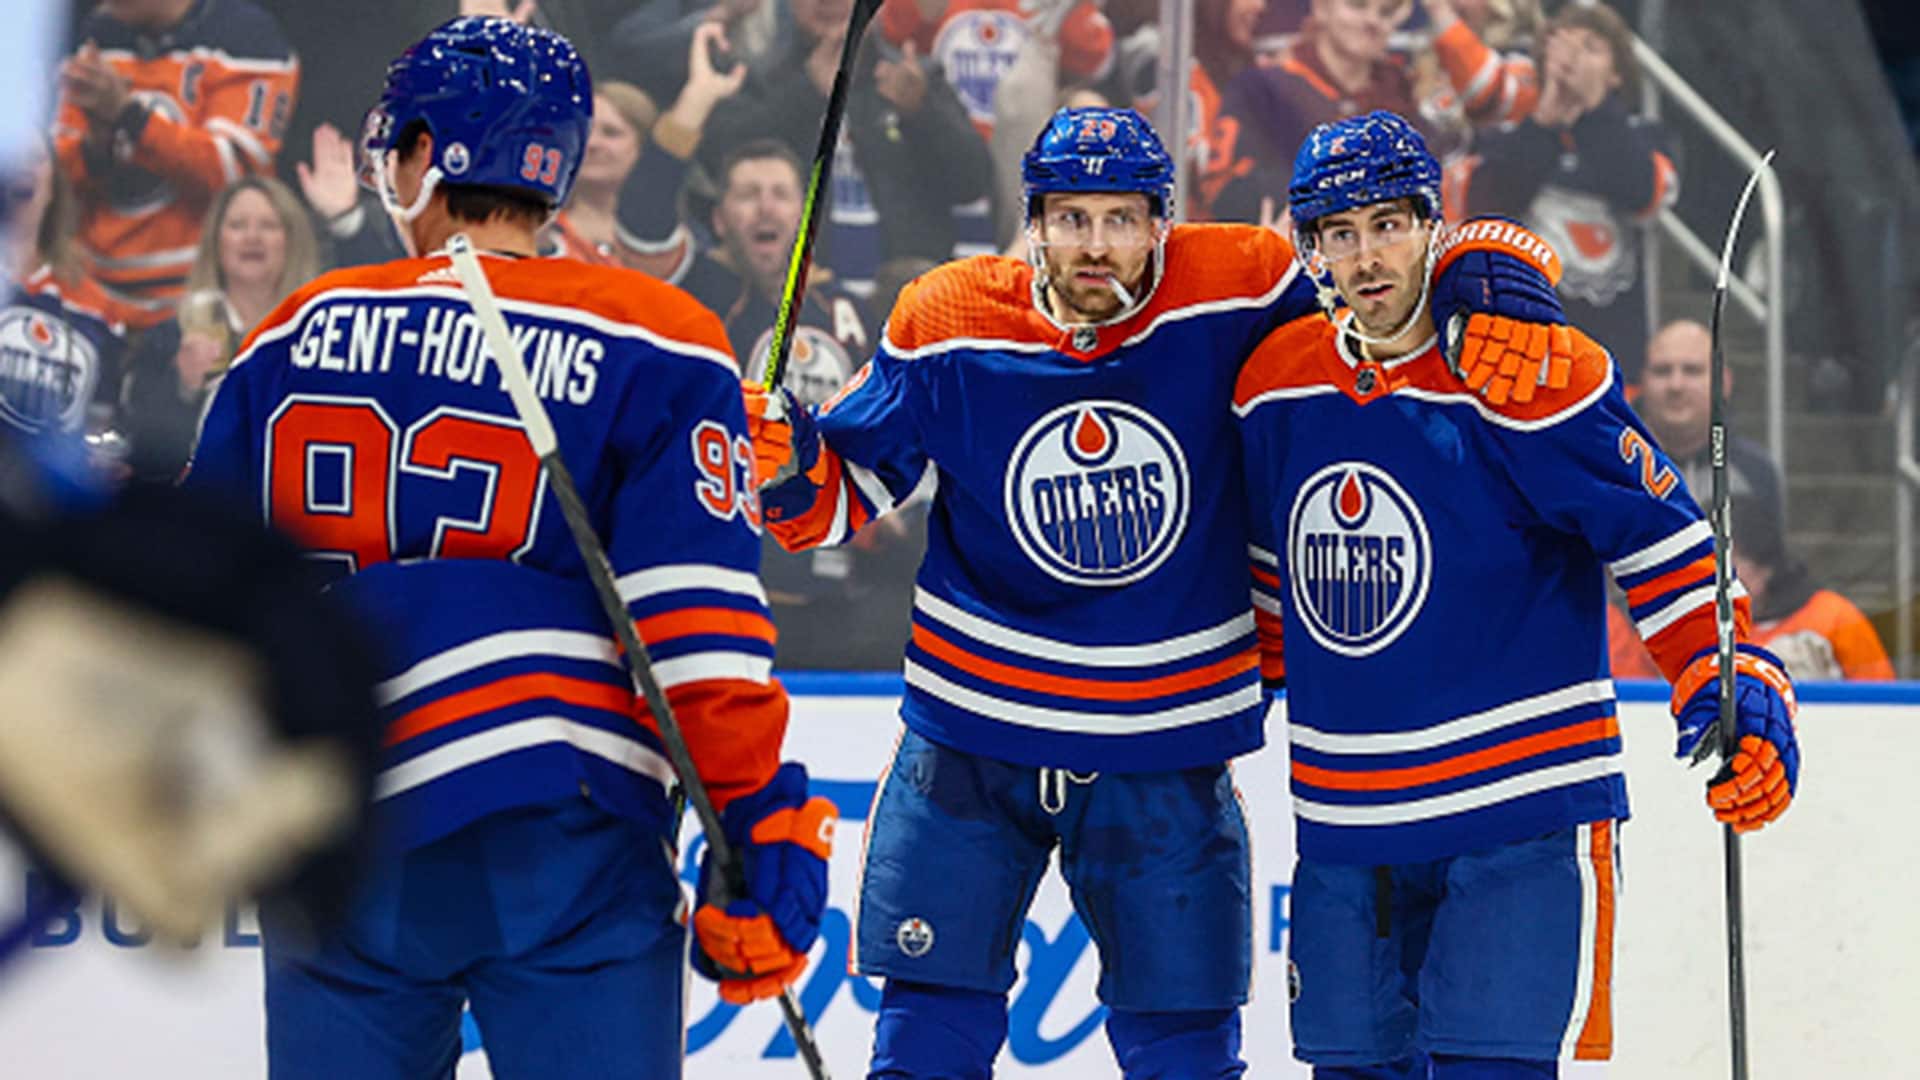 Oilers bringing back classic royal blue jersey - Heavy Hockey Network